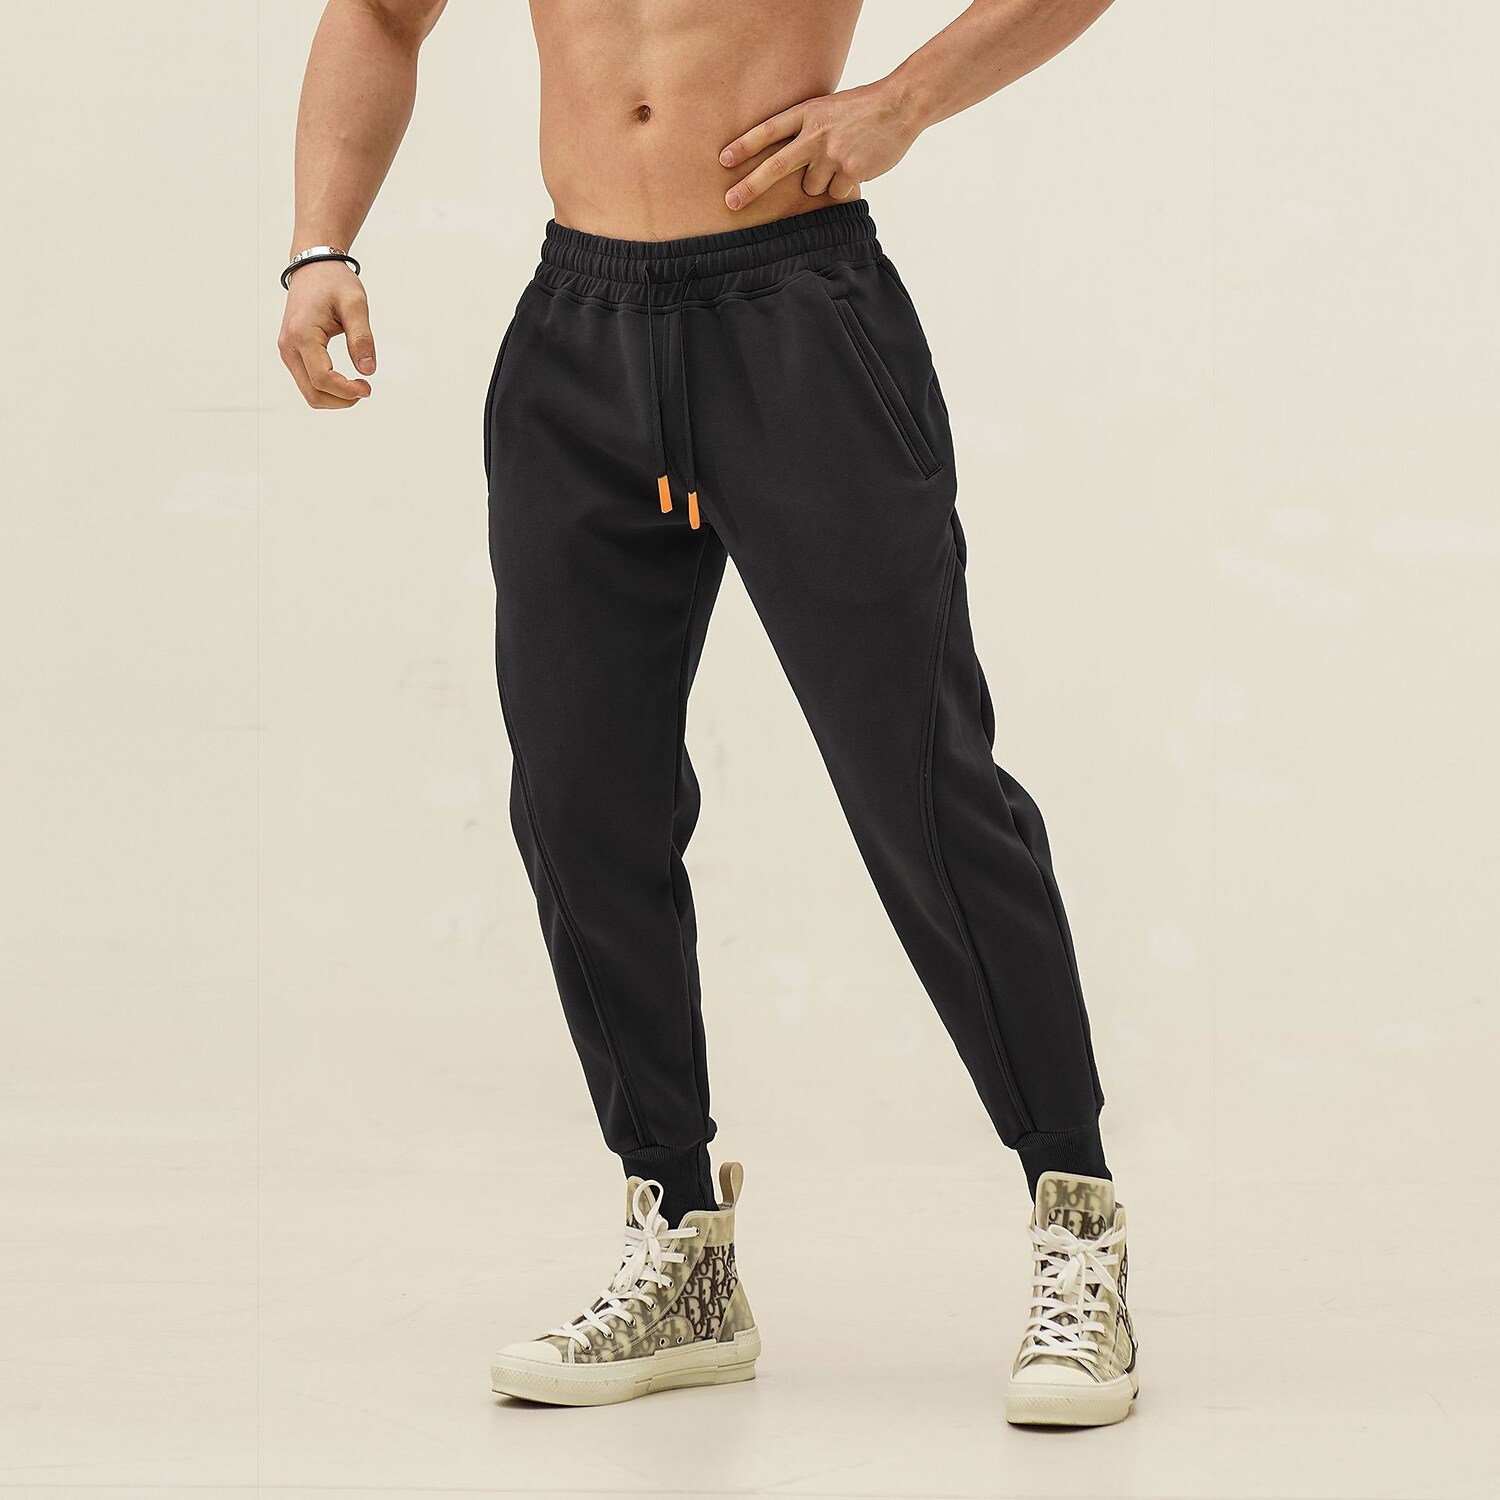 Men's Patchwork Beam Foot High Waist Bottoms Breathable Quick Dry Jogg